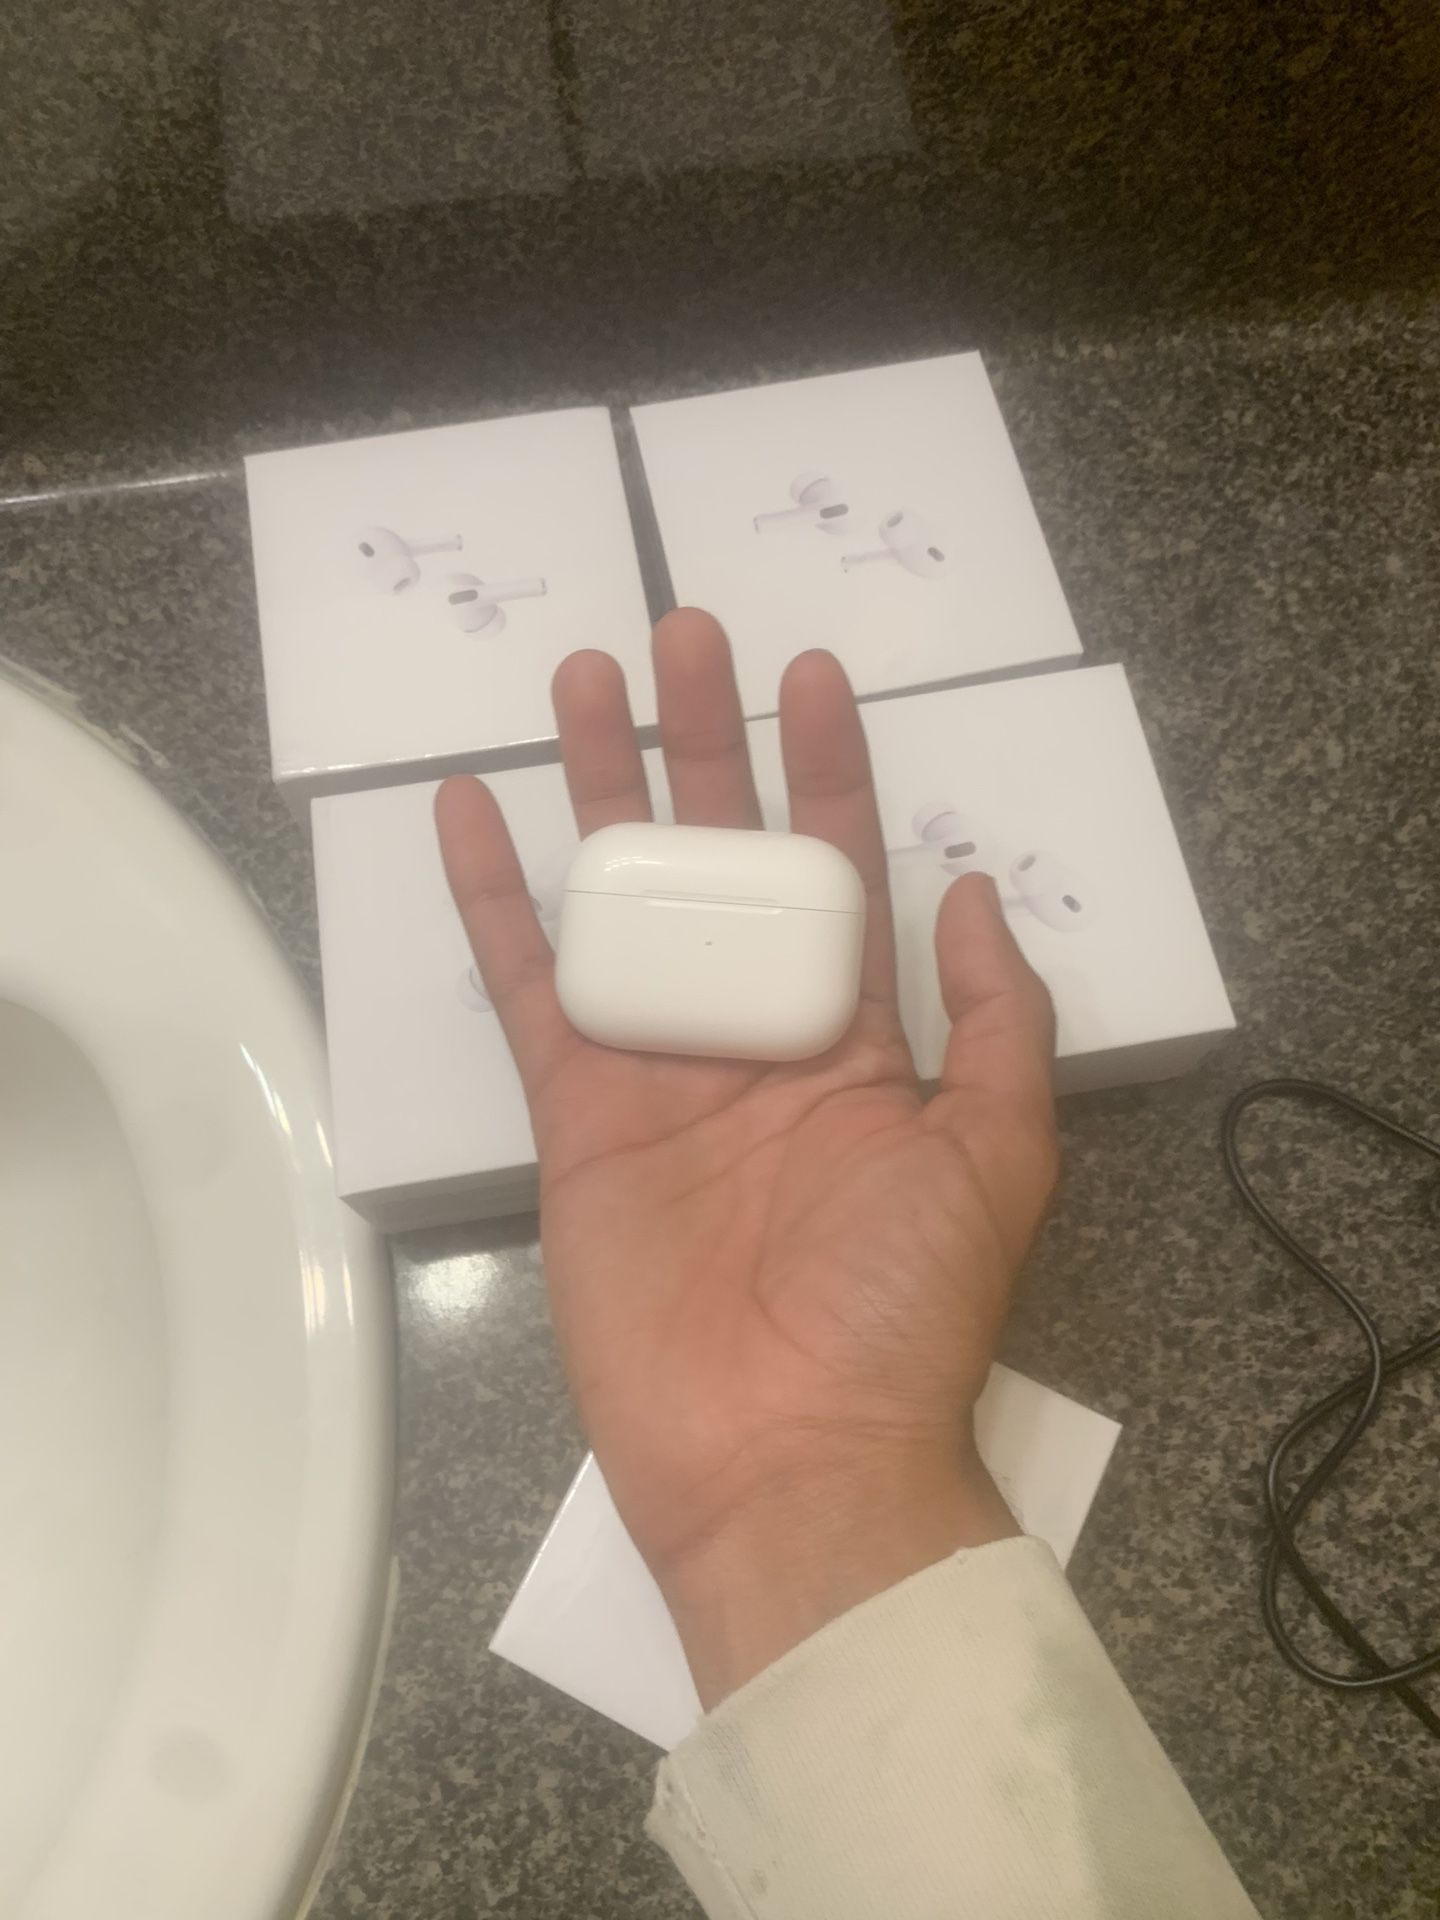 AirPods Pro’s Generation 2